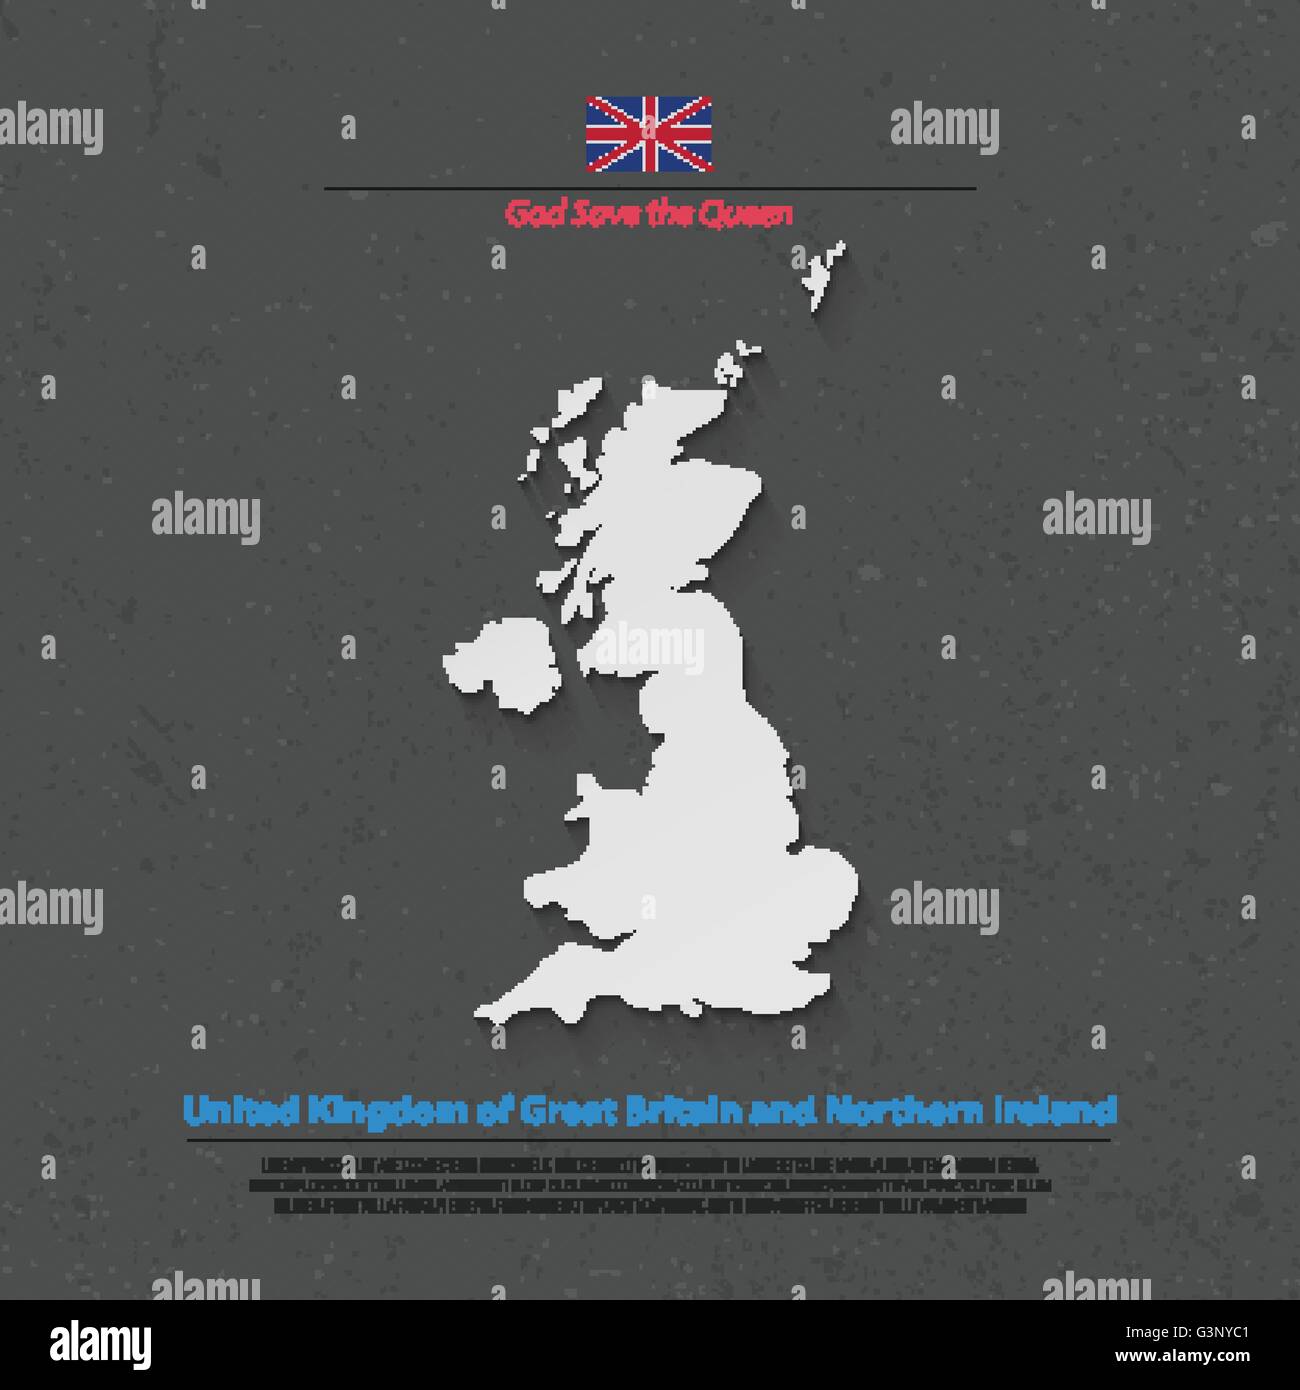 United Kingdom of Great Britain and Northern Ireland map and official flag icons. vector British political map 3d illustration. Stock Vector